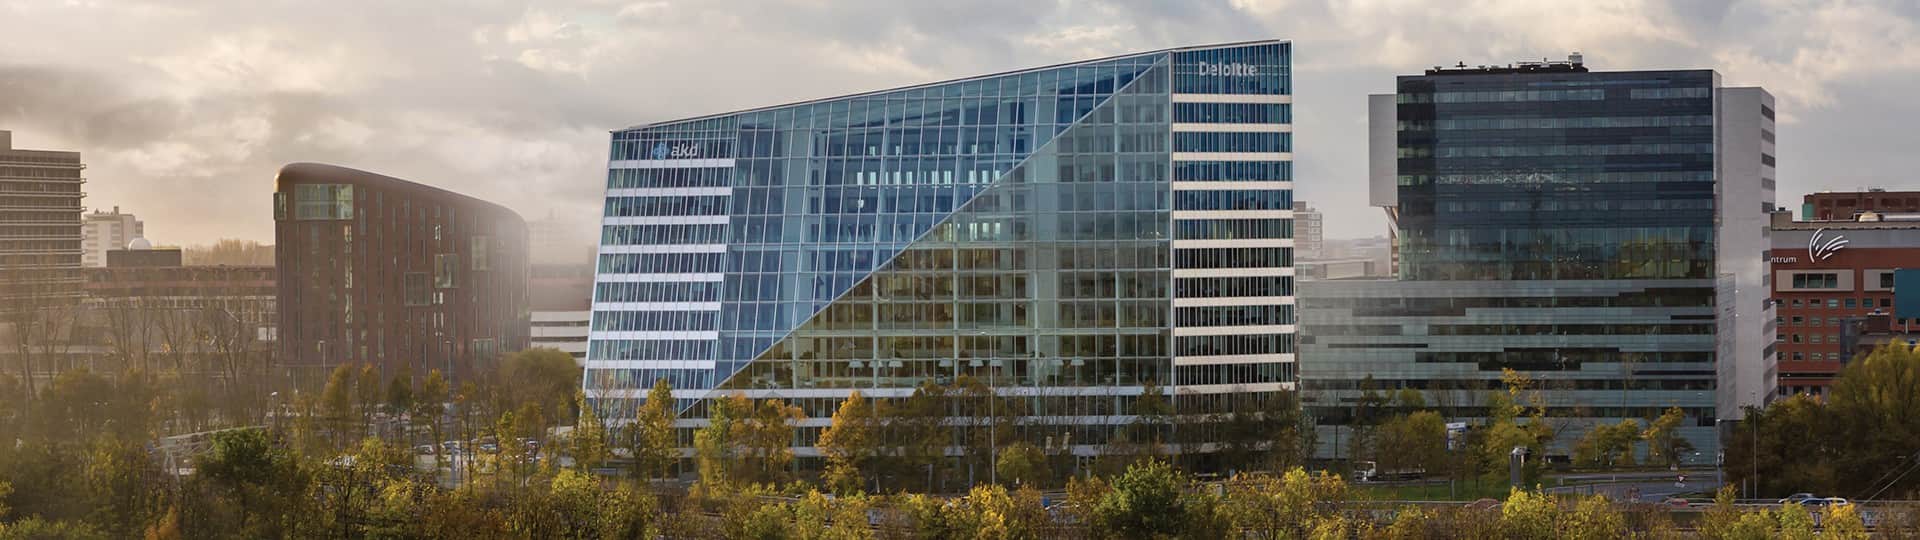  the glass building of the Edge project